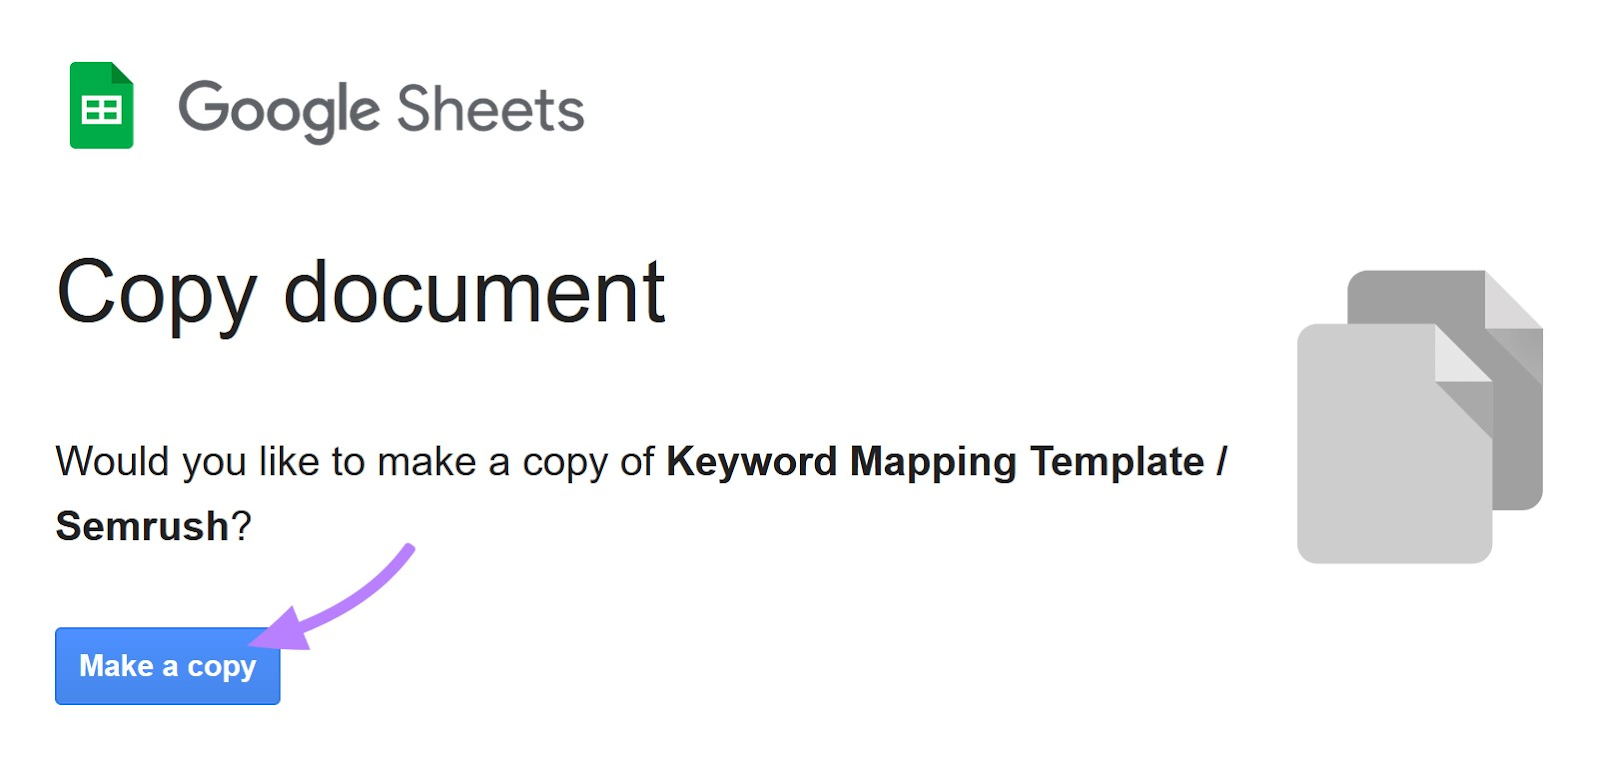 Google Sheets "Copy document" page